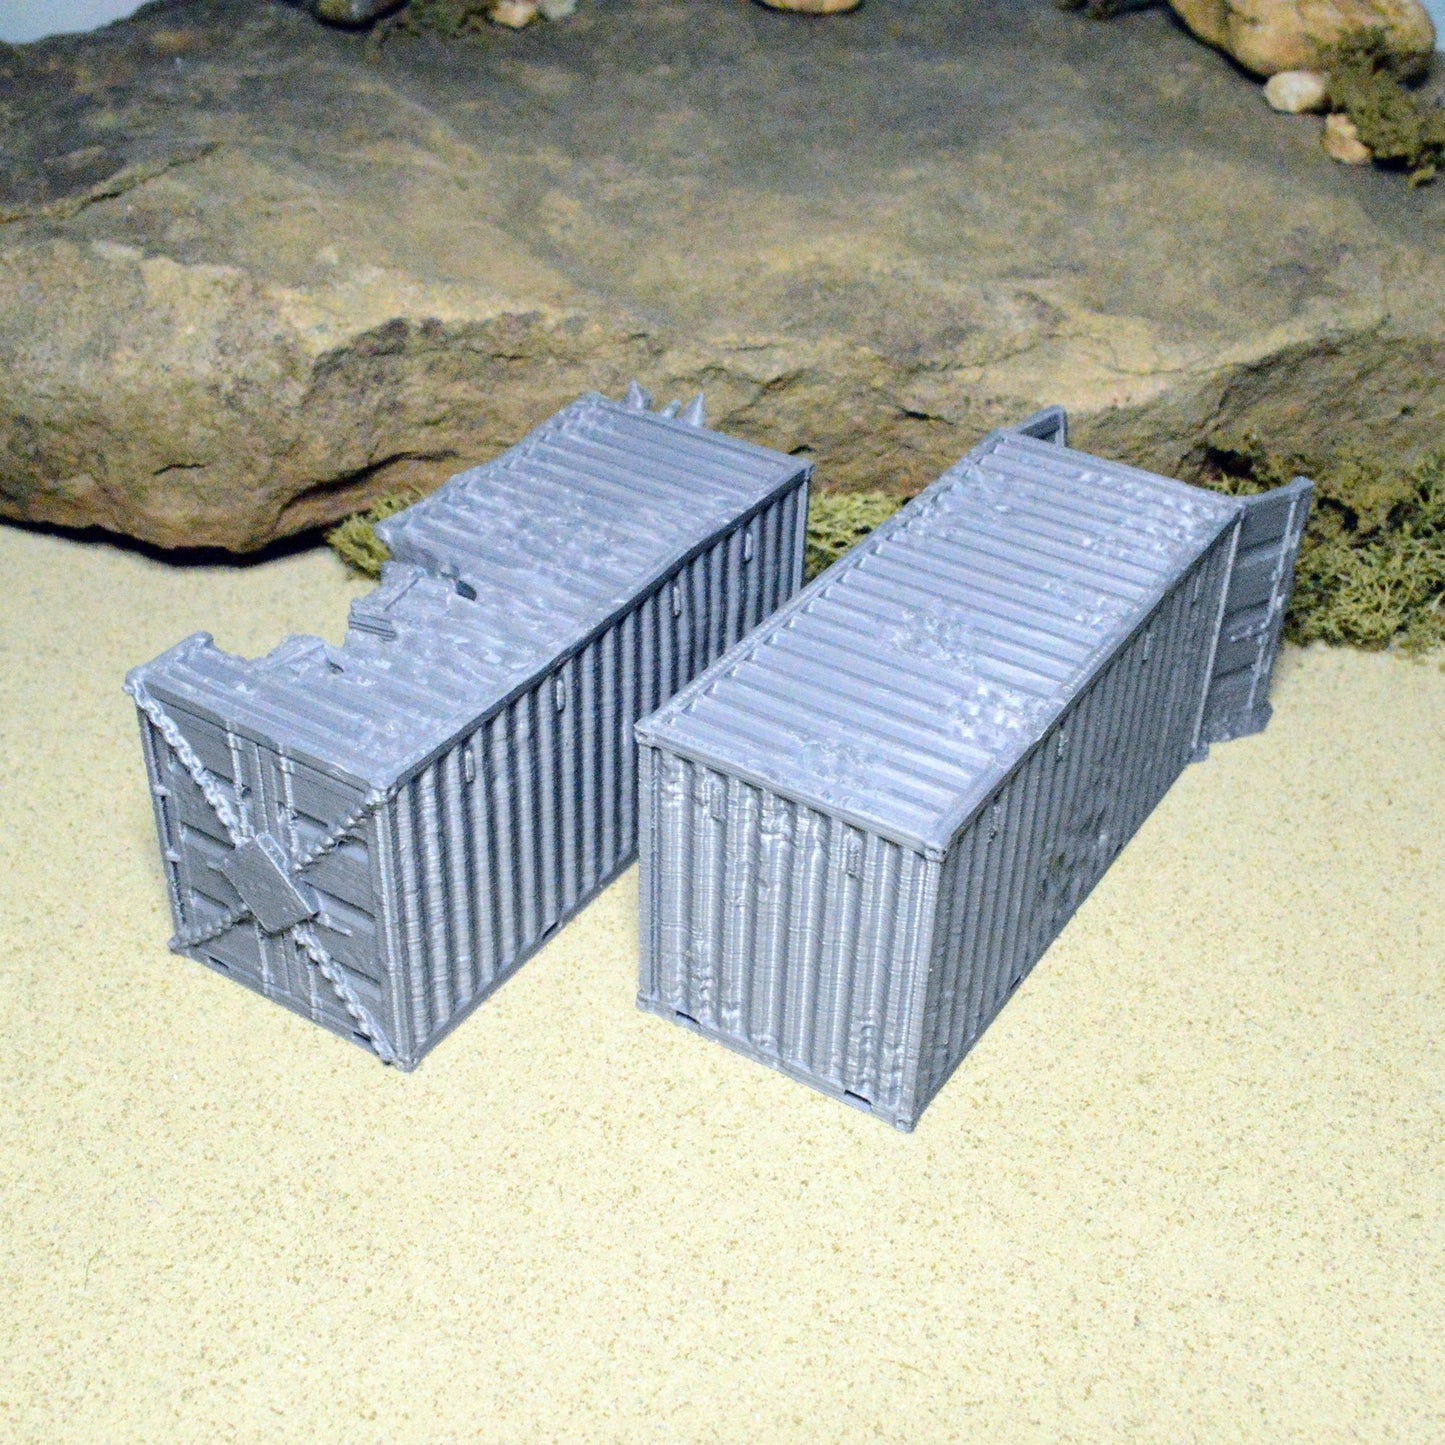 Scrapyard Miniature Shipping Containers 15mm 20mm 28mm 32mm for Gaslands Terrain, Urban Fallout Wasteland Post-Apocalyptic